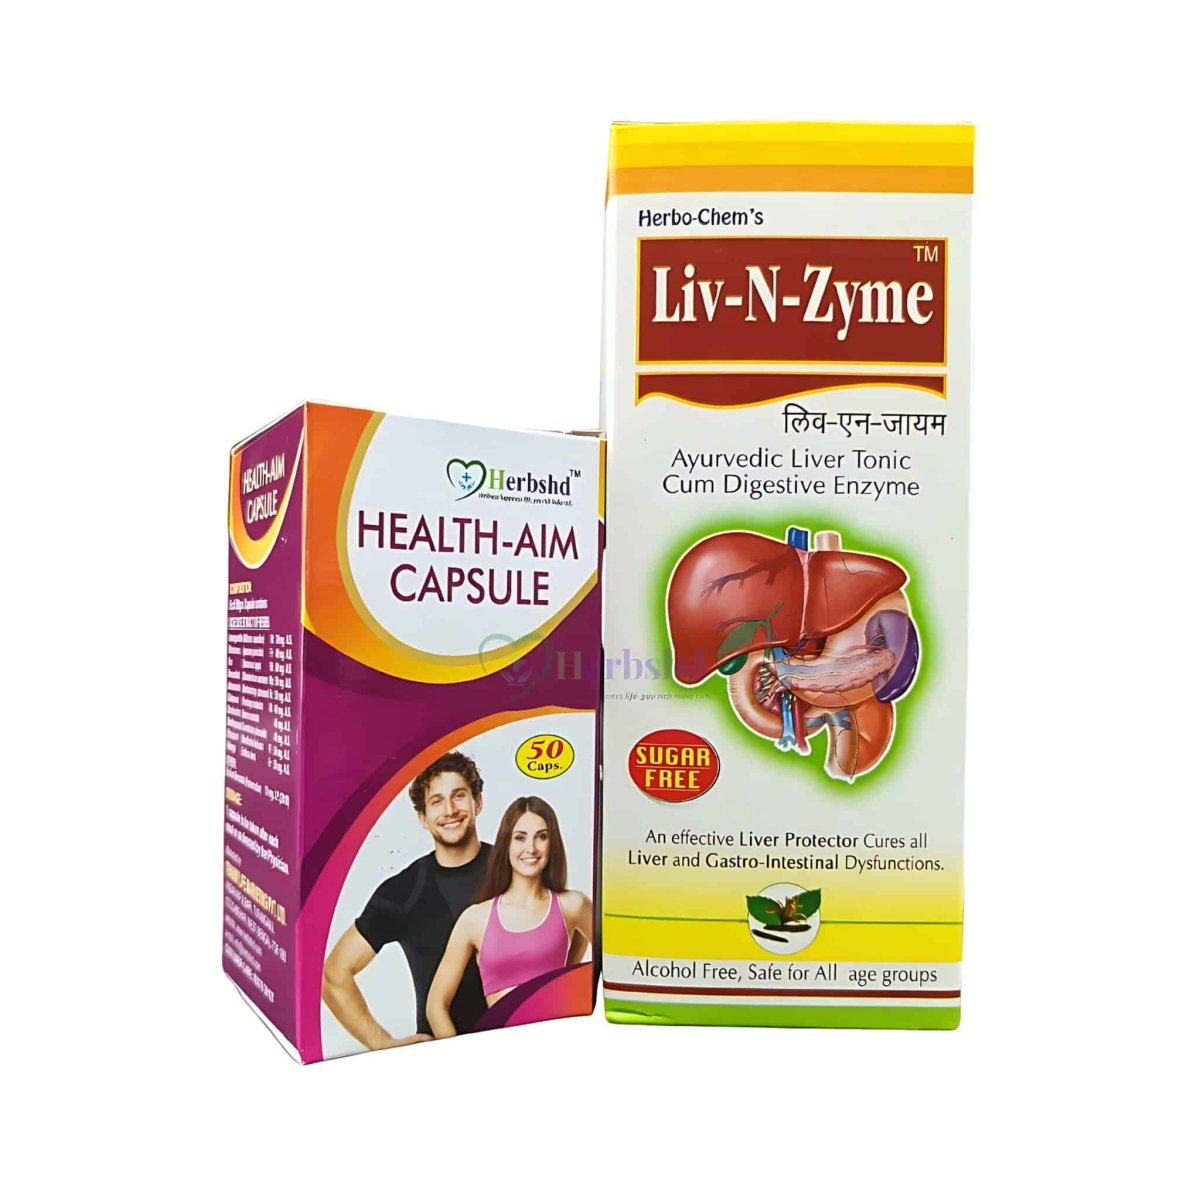 Ayurvedic Liv-N-Zyme Syrup for Liver Protection & Health-Aim Capsule ( Combo )